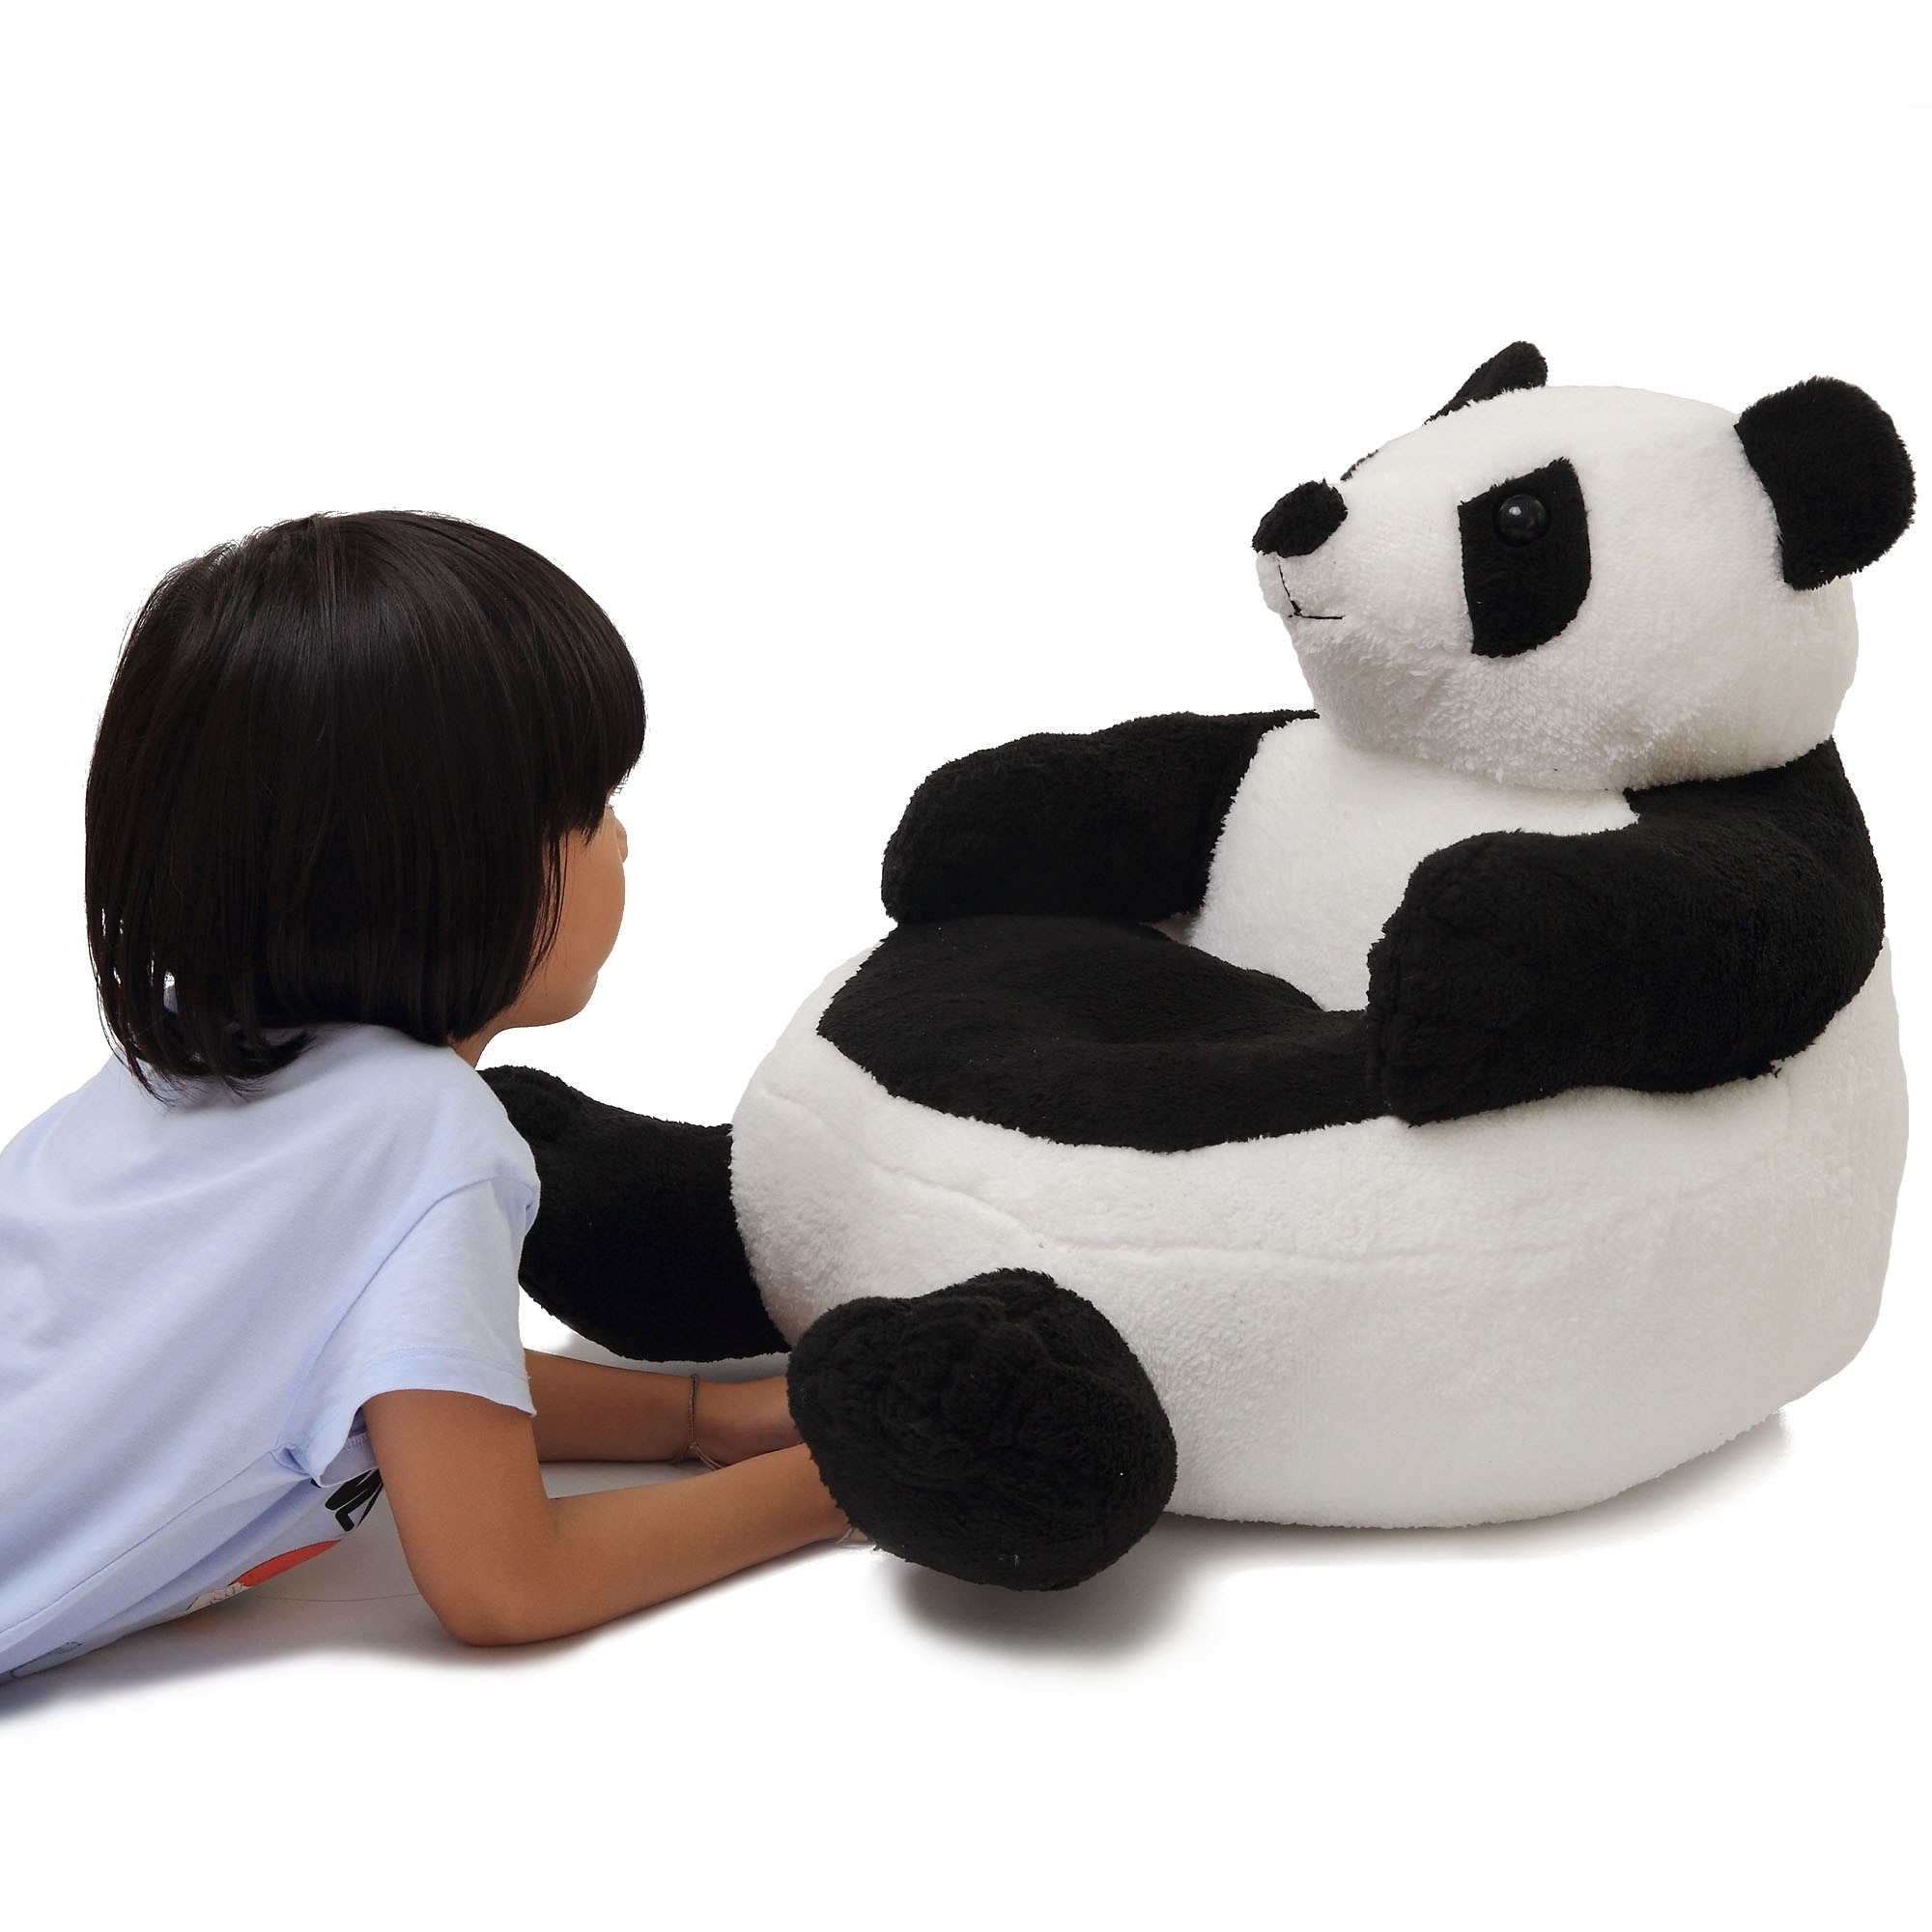 Kids Sofa Children Leather Chair w/ Armrest Toddler Lounge Bed Game Room Panda 